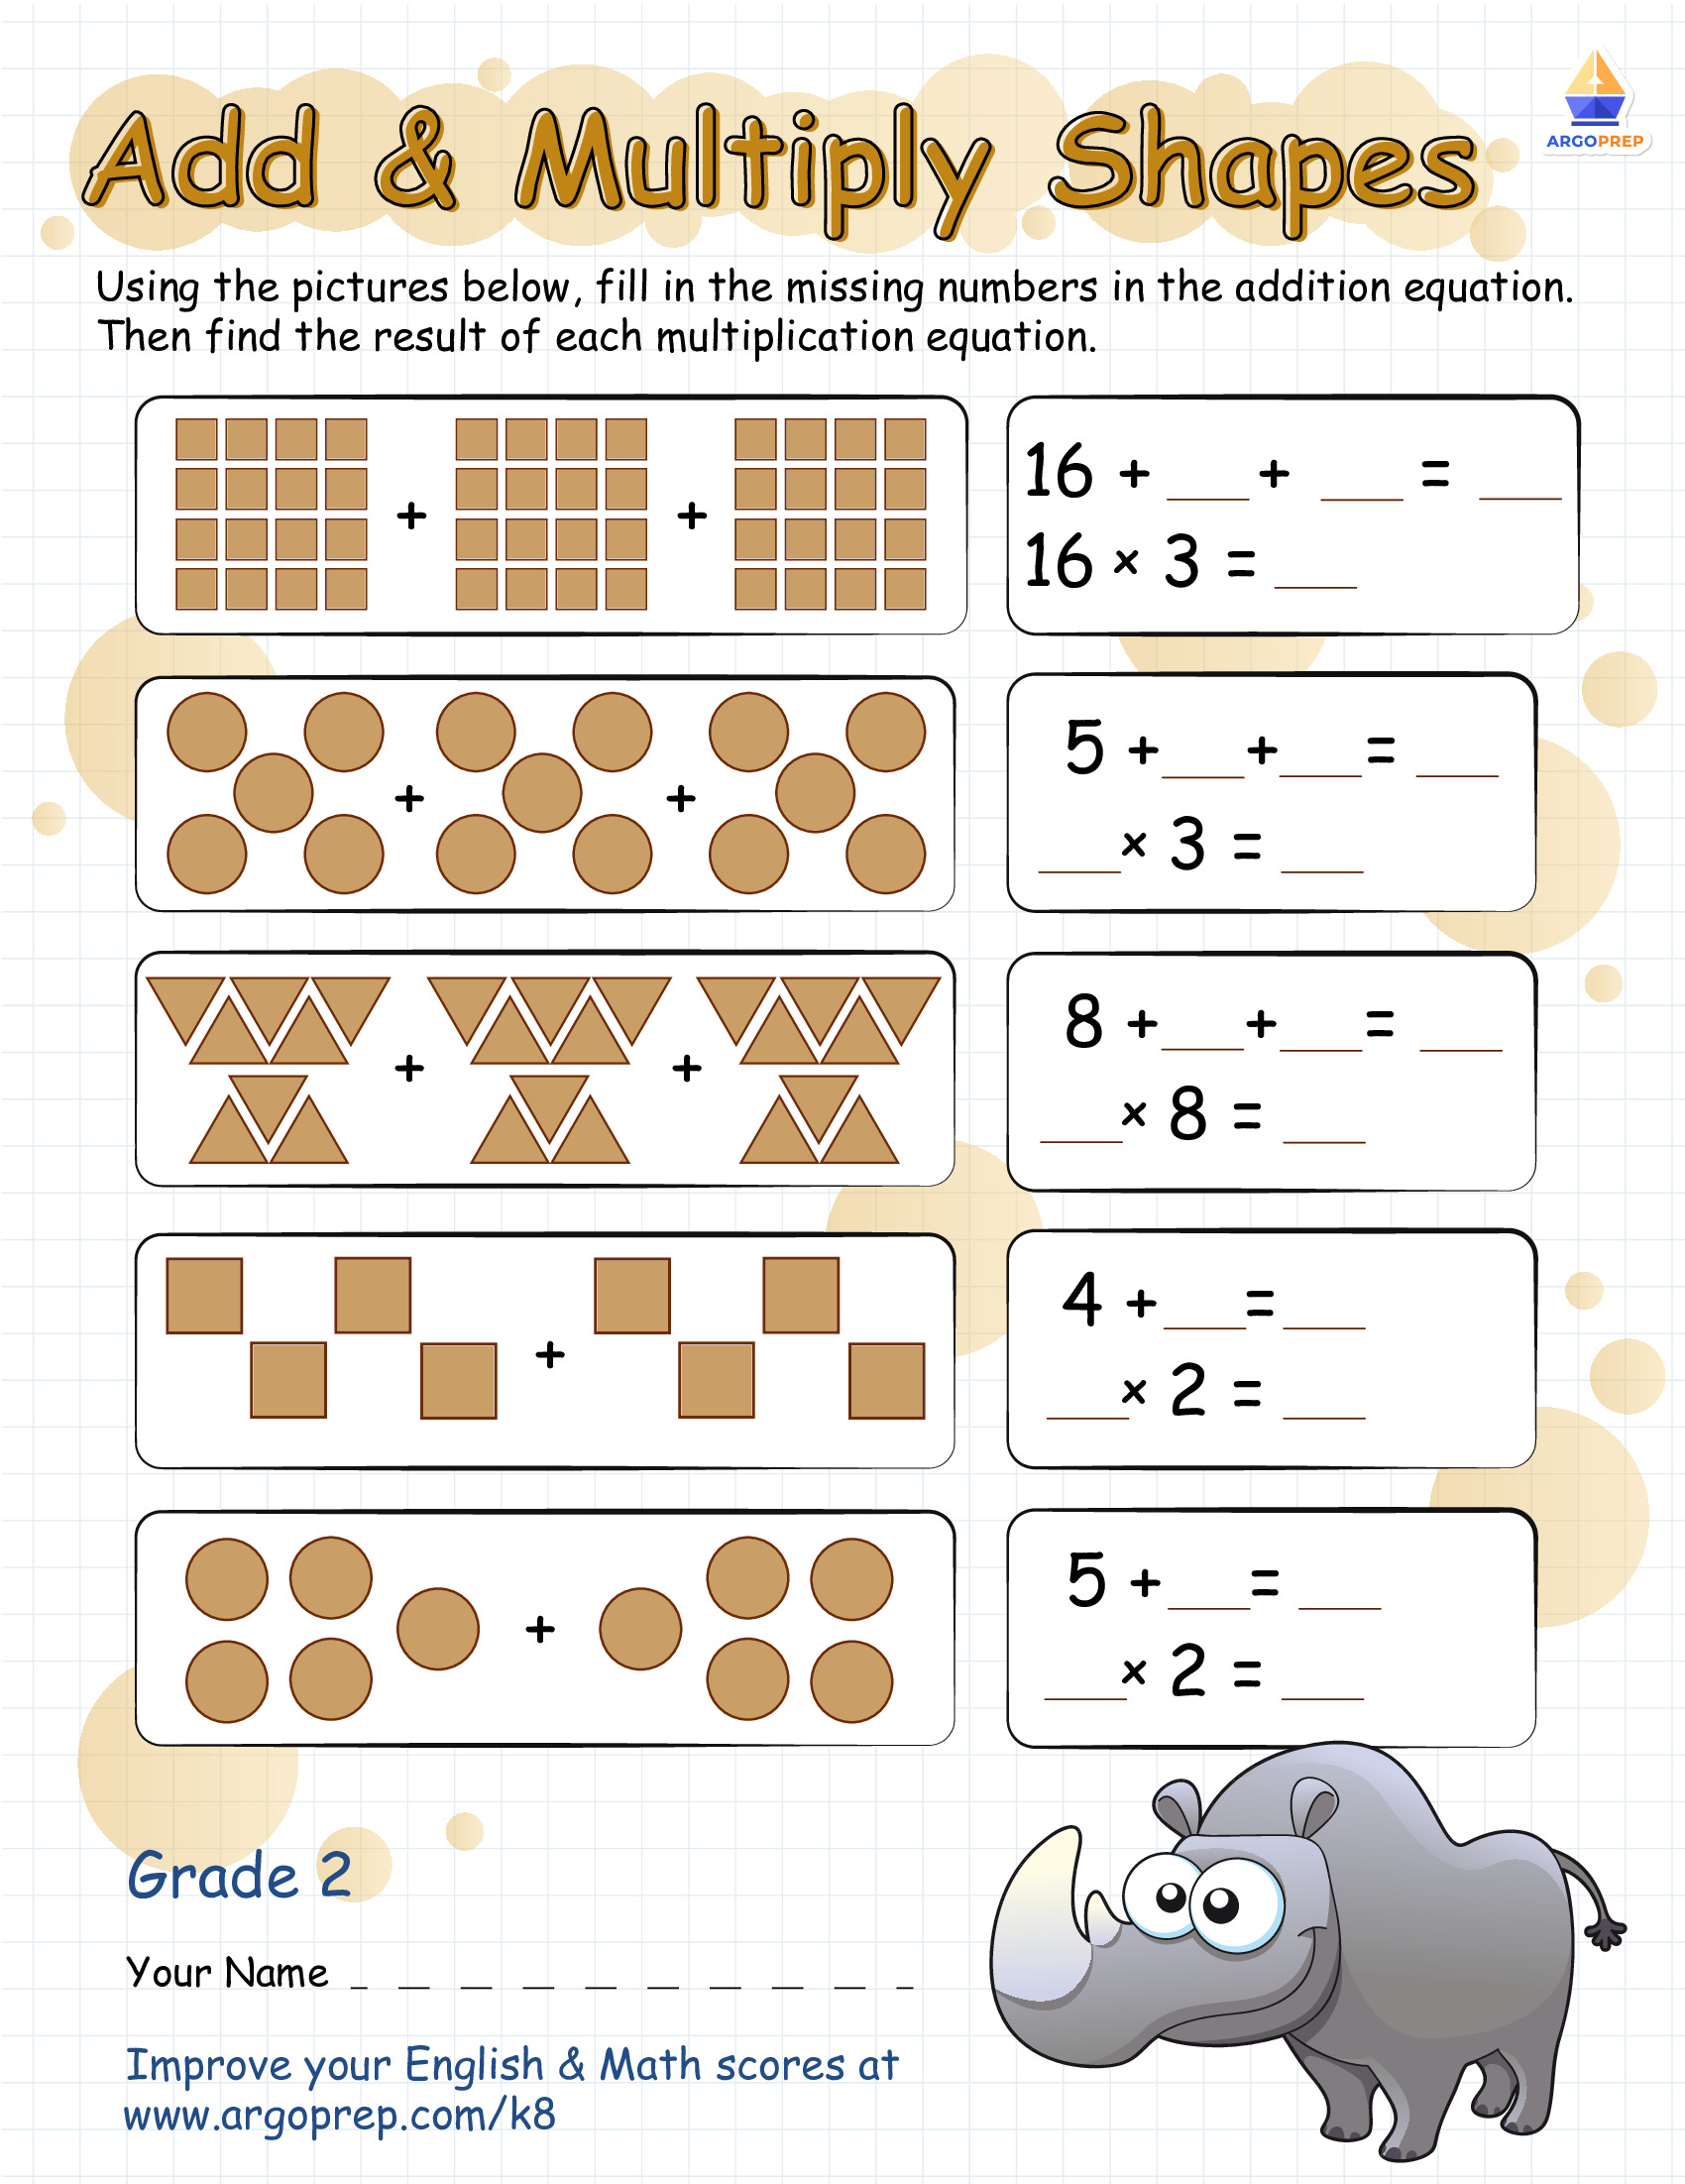 Multiplication As Repeated Addition 2nd Grade 3rd Grade Math Worksheet Greatschools Repeated